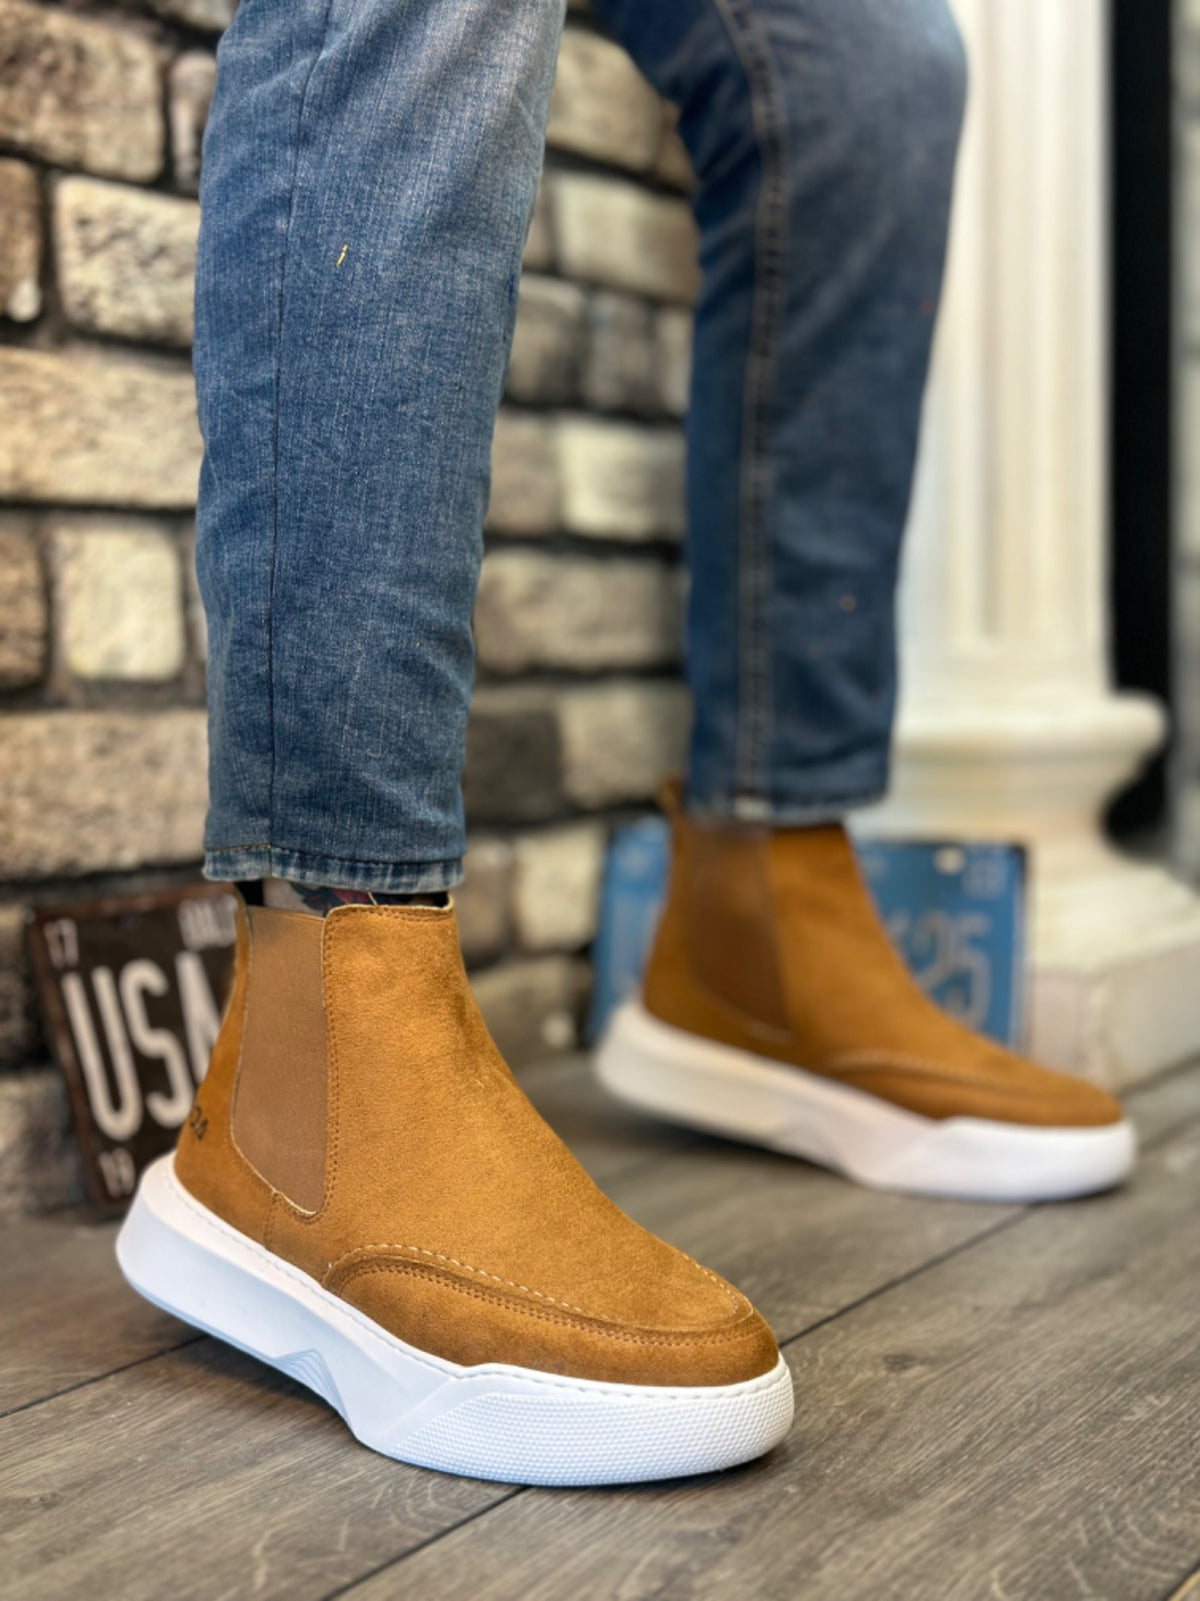 BA0150 Laceless Men's Tan Suede White High Sole Sports Boots - STREETMODE ™